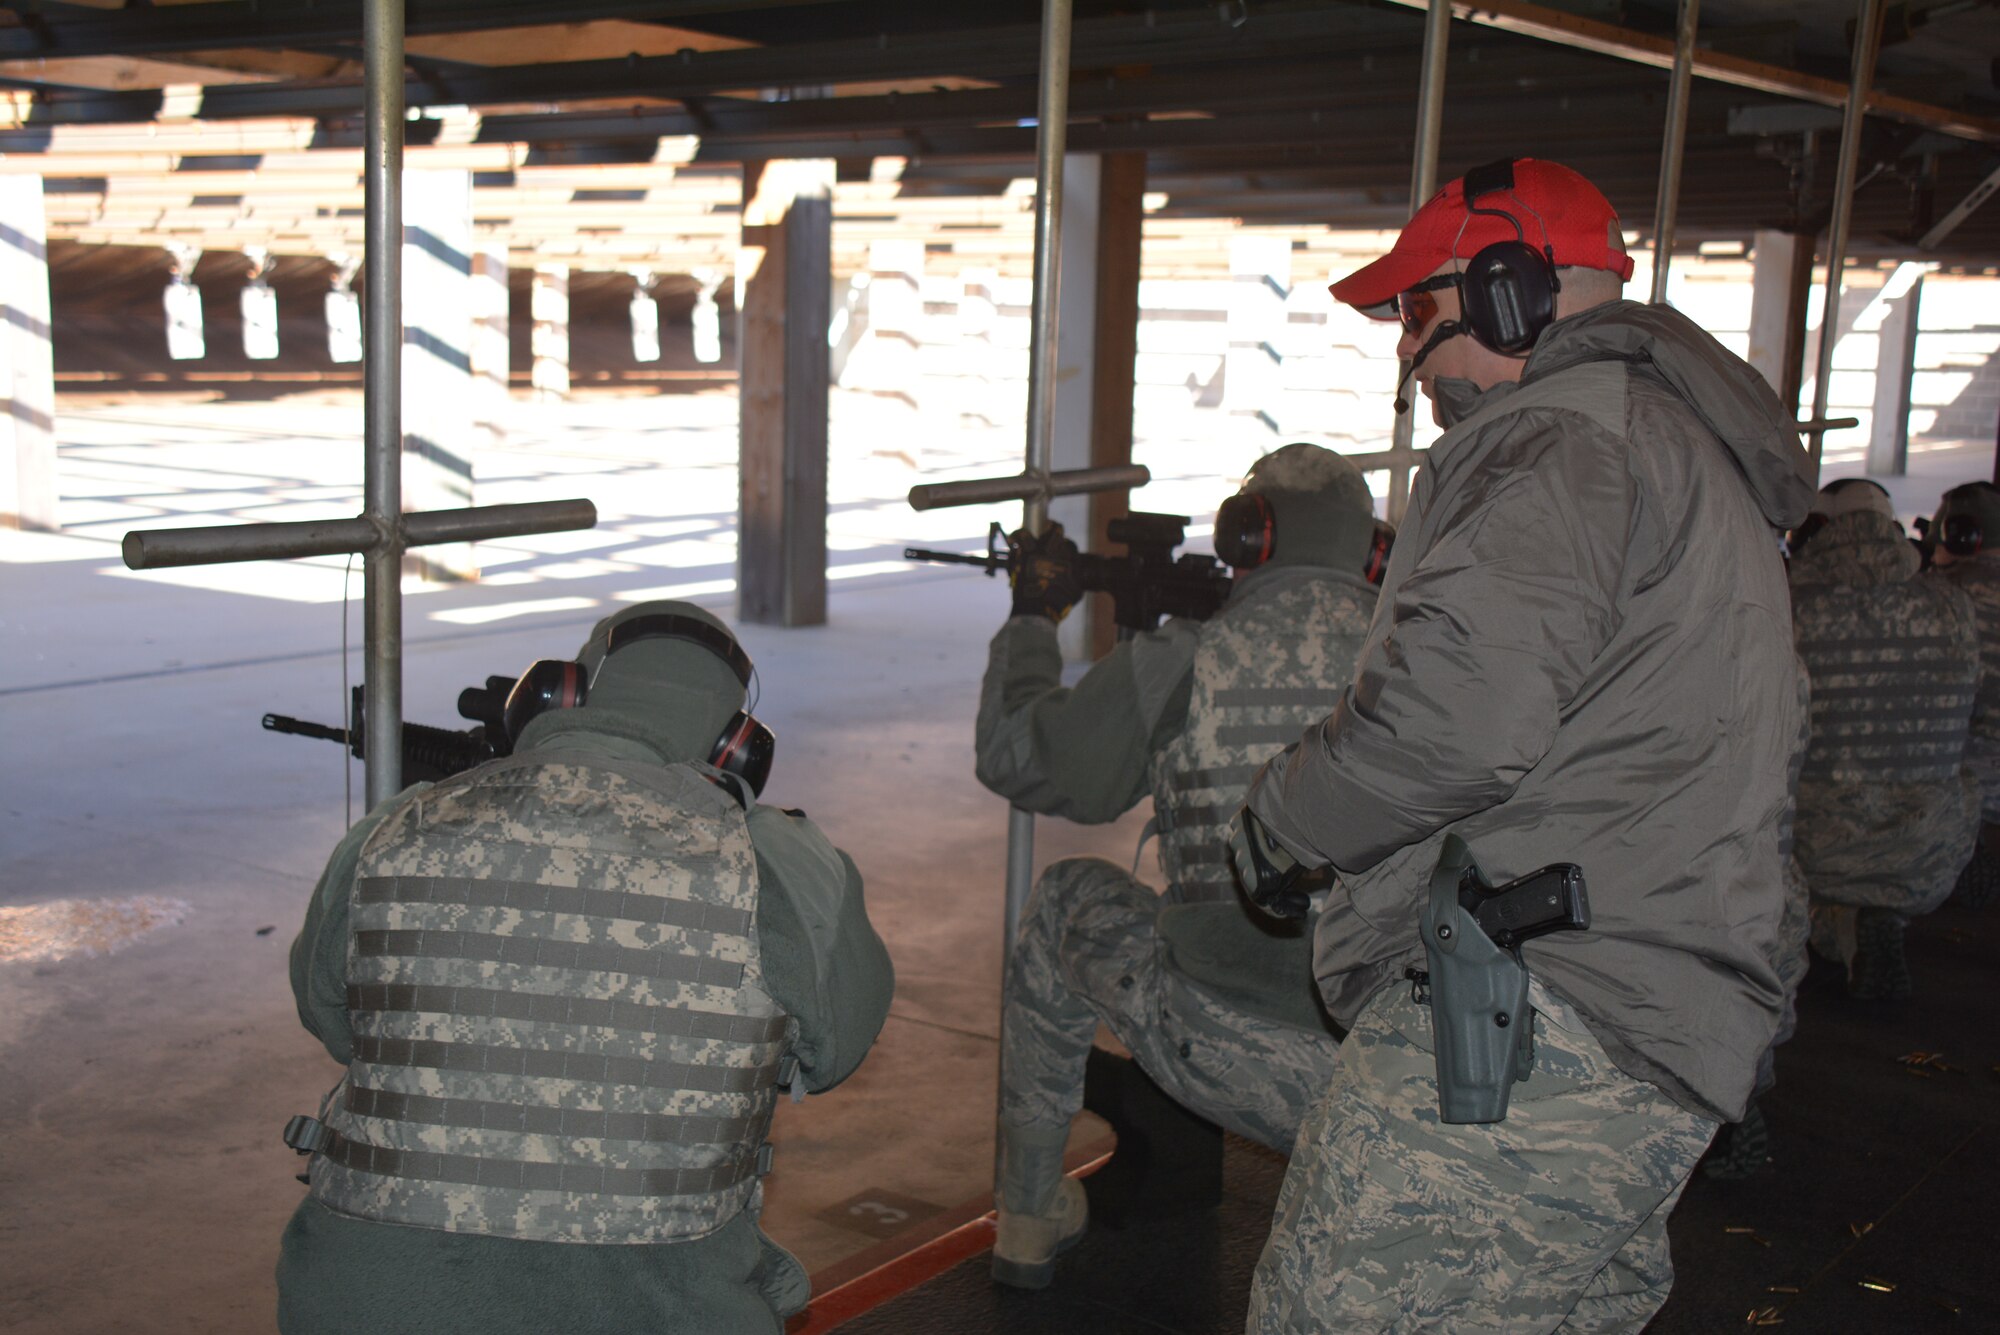 A Combat Arms Training and Maintenance instructor from the 507th Security Forces Squadron observes Airmen during M-4 carbine qualification Jan. 10, 2016, at the firing range at Tinker Air Force Base, Okla. CATM conducts training on proper use and maintenance of firearms during each Unit Training Assembly, ensuring Reservists in the 507th Air Refueling Wing are qualified and ready to deploy at a moment’s notice. (U.S. Air Force photo/Tech. Sgt. Charles Taylor)
